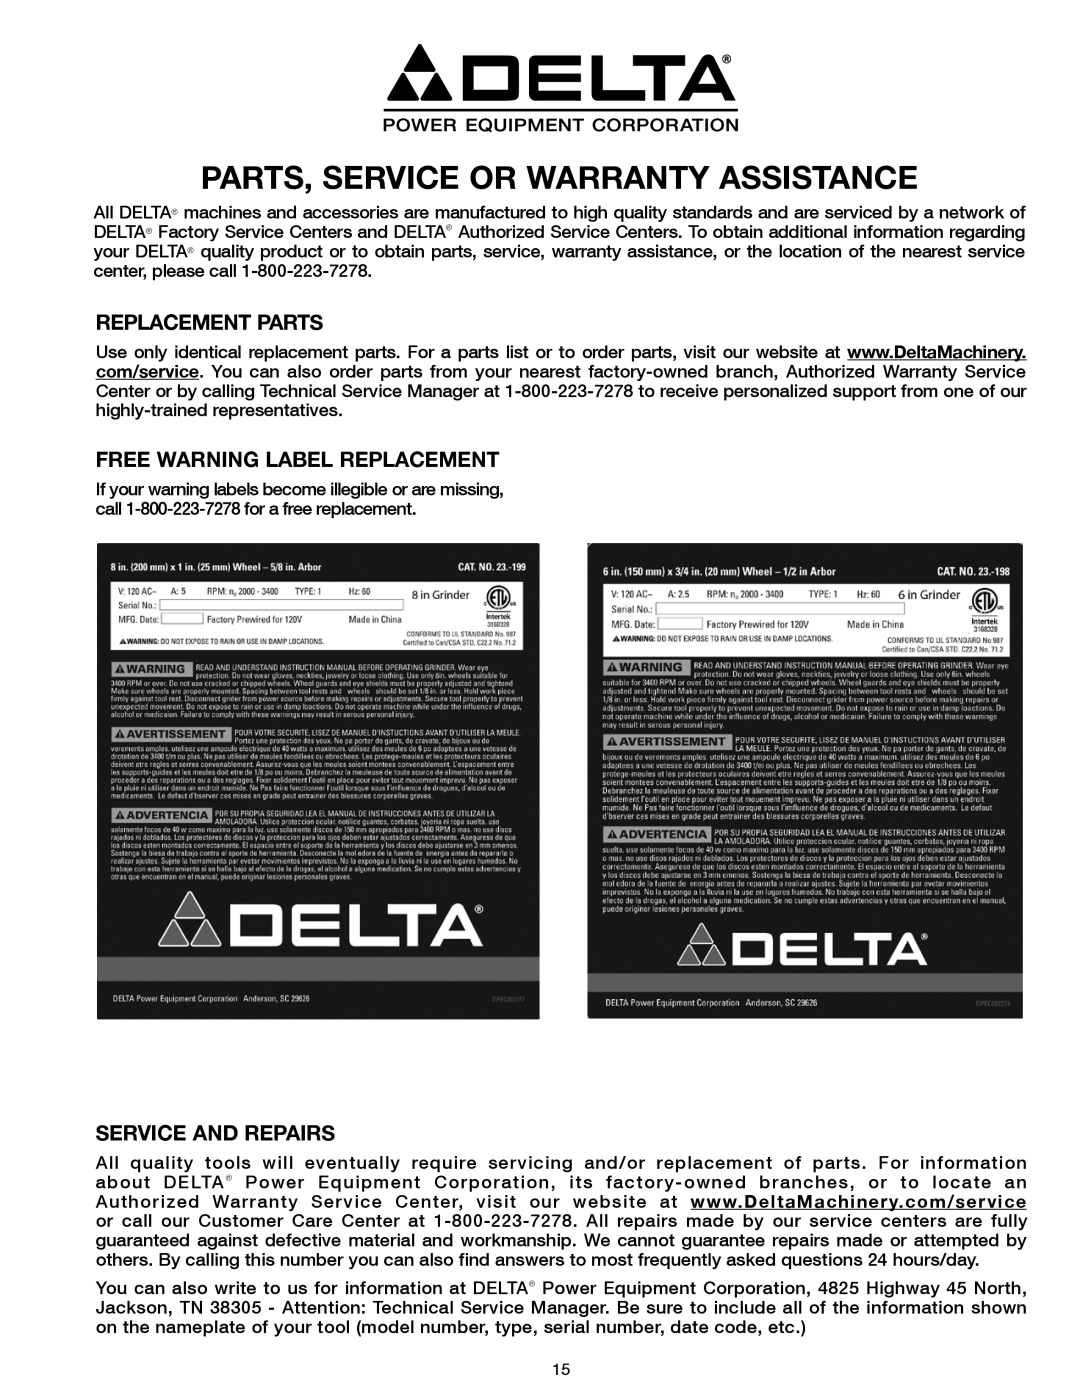 Delta 23-198, 23-199 instruction manual Replacement Parts, Service and Repairs 